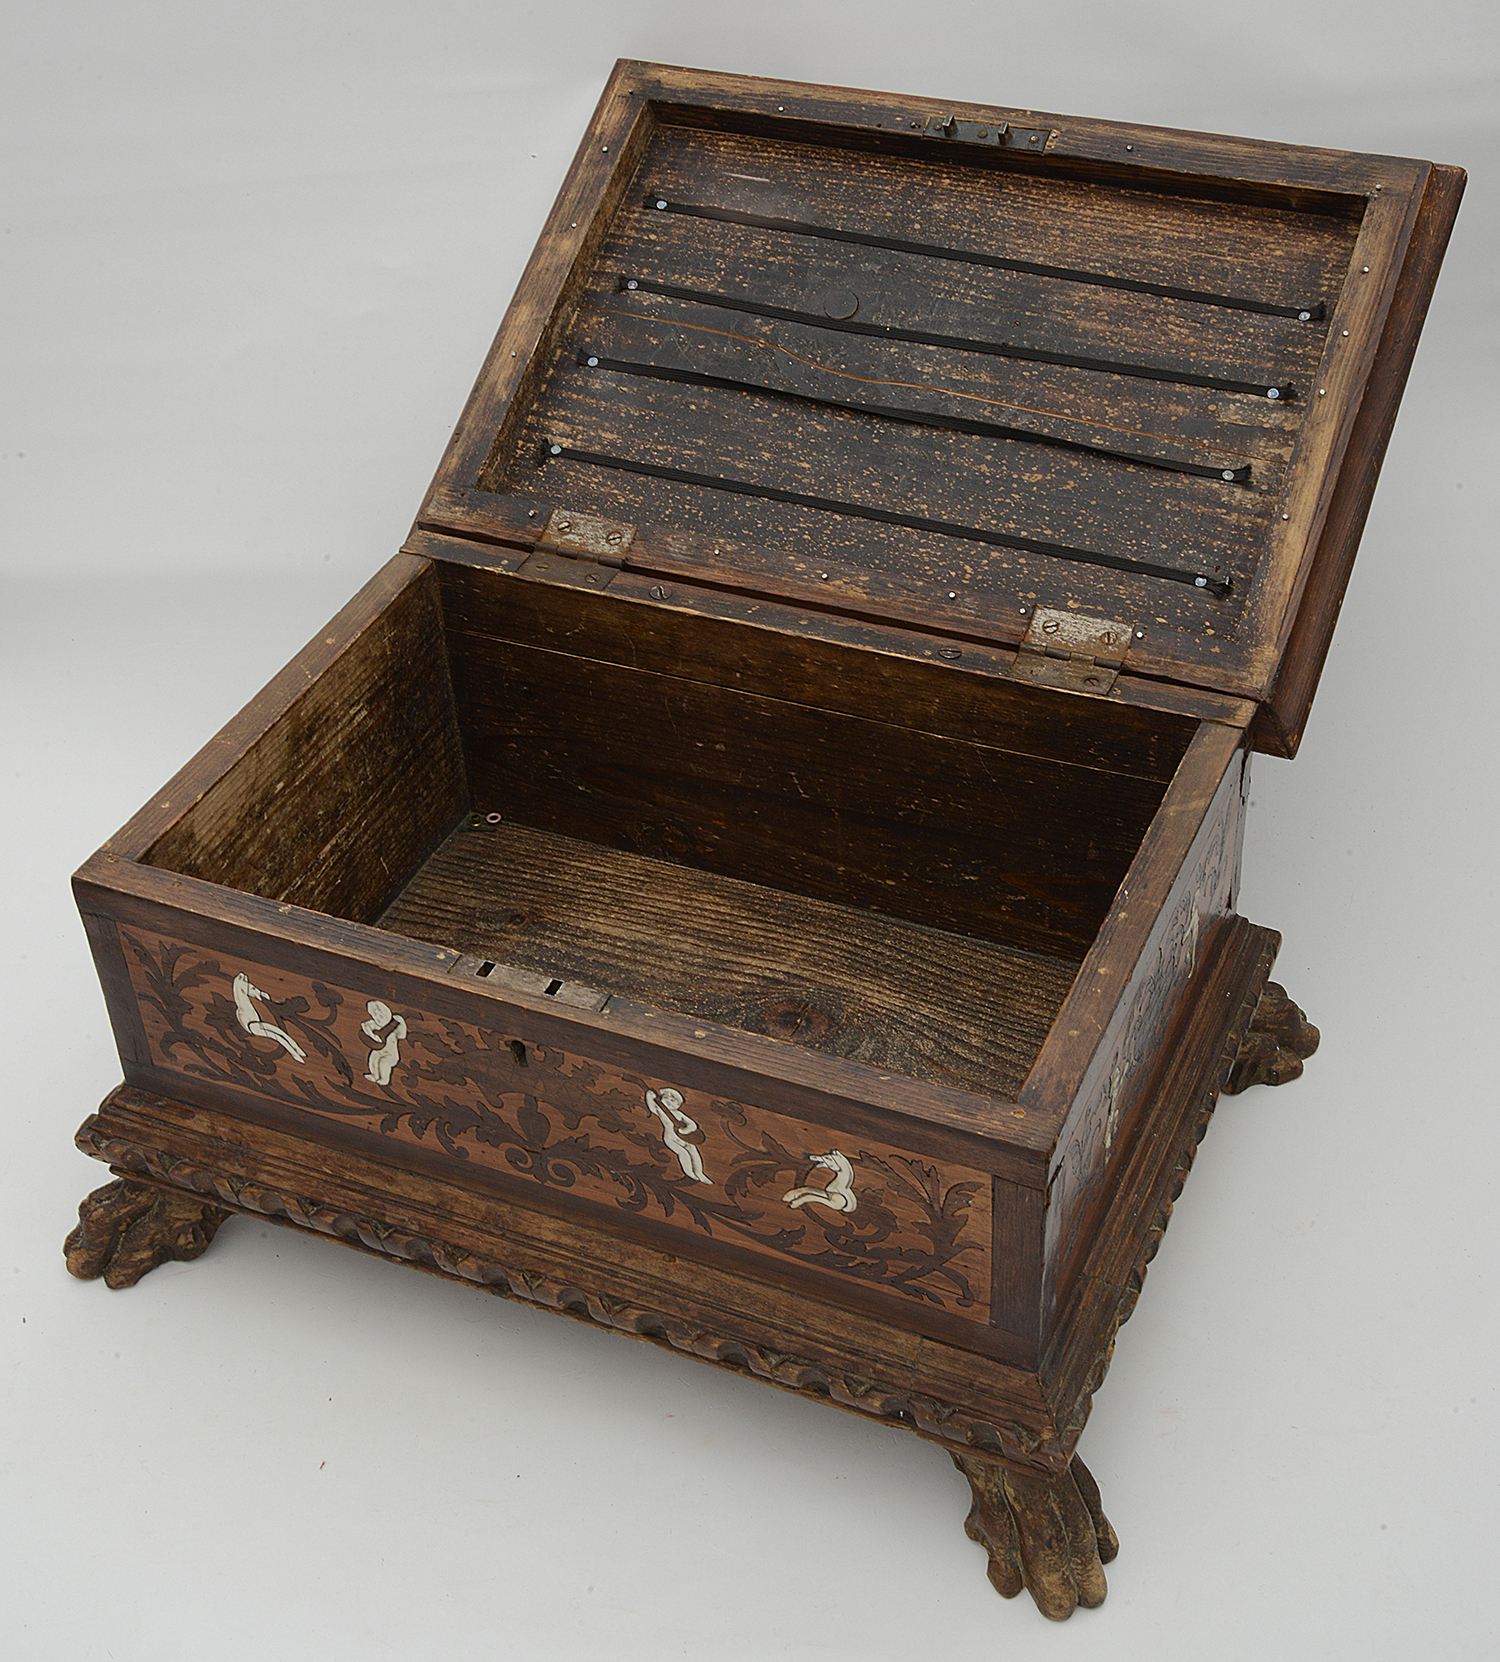 A late 18th century Northern Italian walnut, marquetry and ivory inlaid table casket - Image 2 of 2